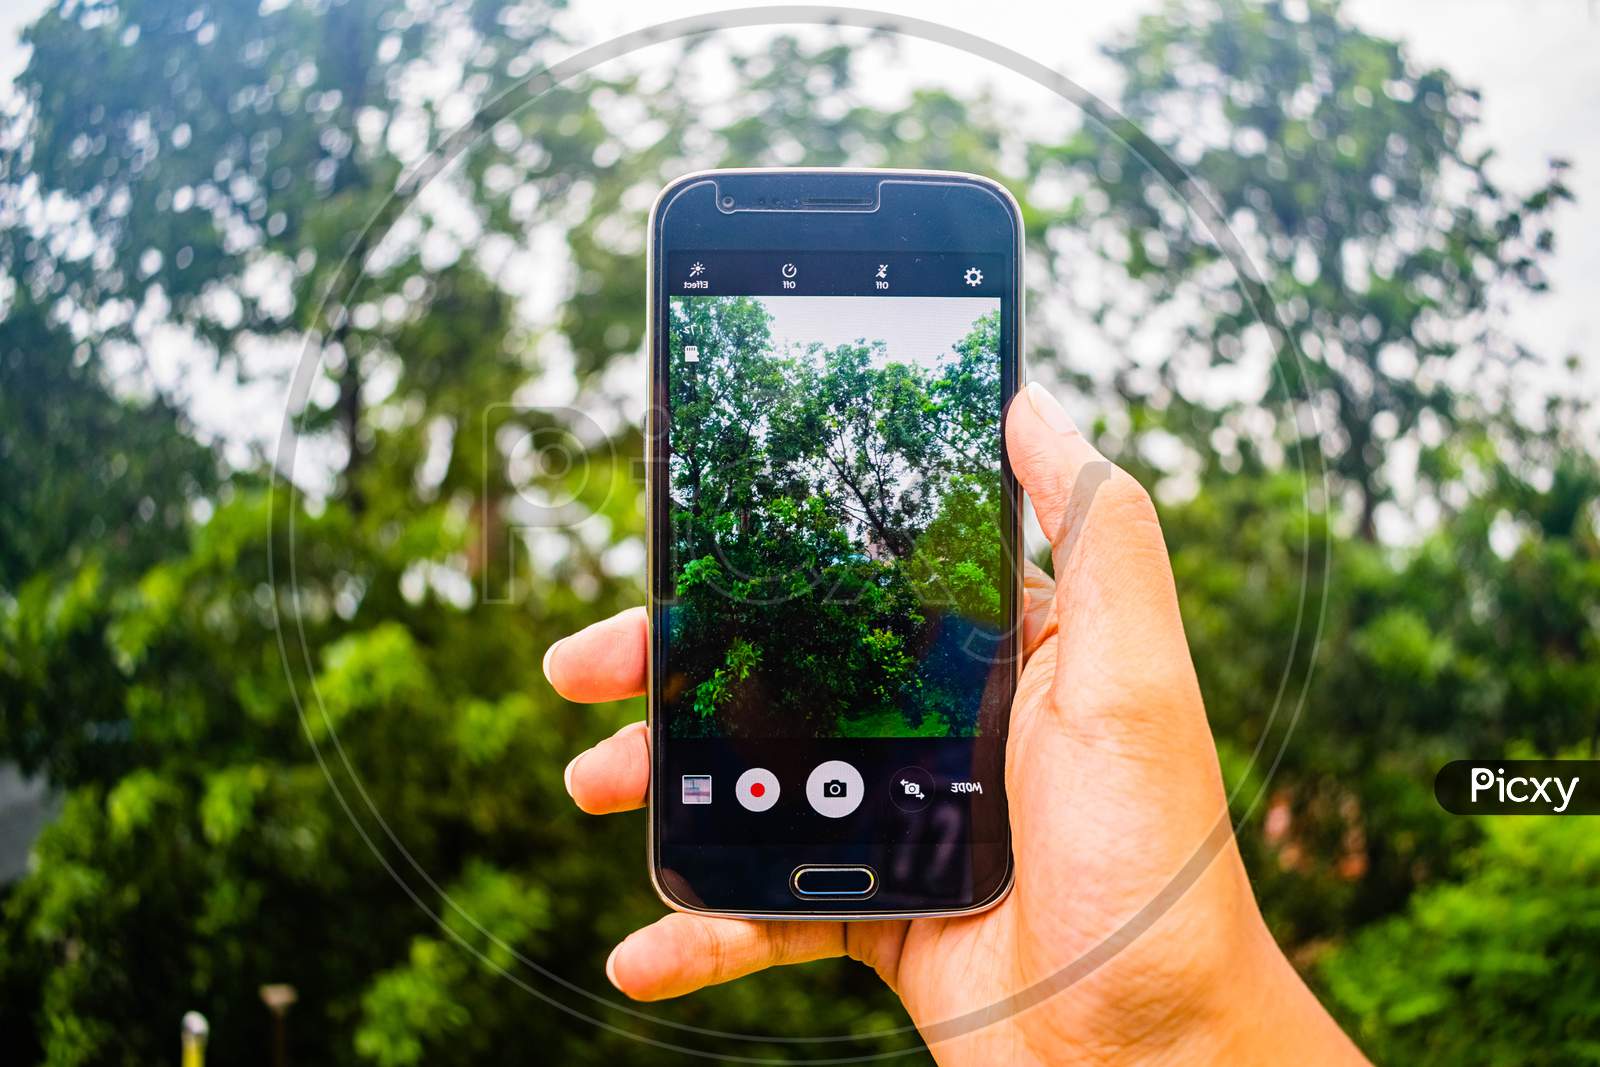 Smart Phone Holding In Hand And Capturing Photo of Nature. Nature Photography through mobile screen, everything but the picture on display is blur in background. Cell Phone Photography In Warm Mood.